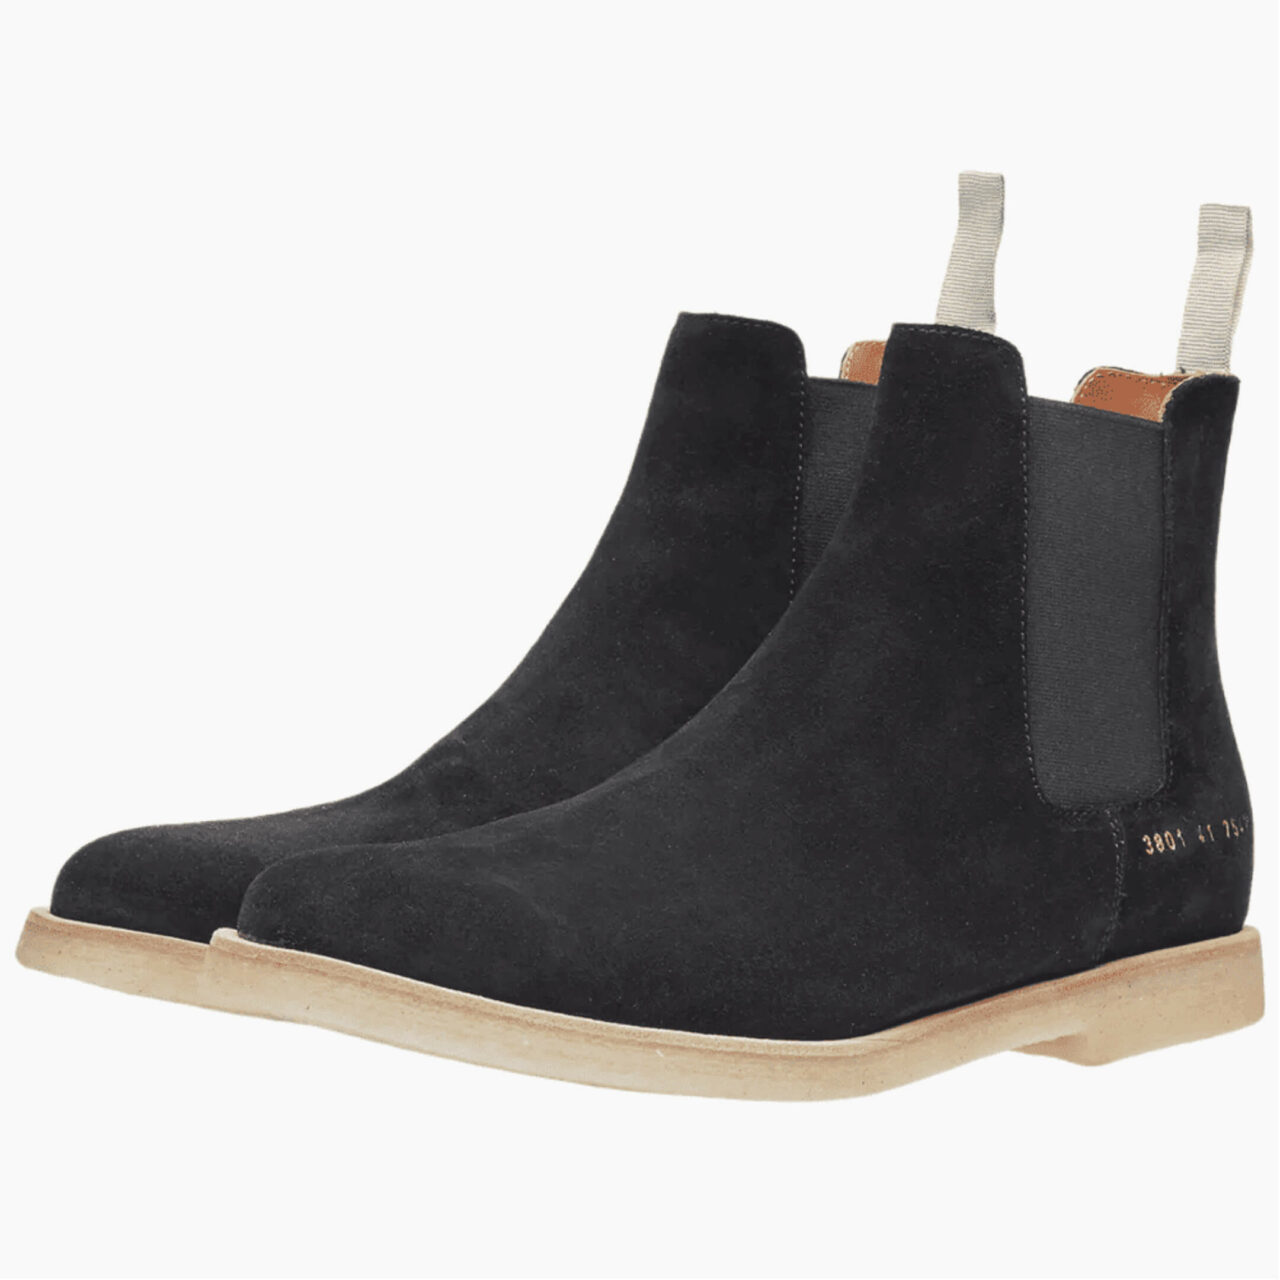 Common Projects Women's Suede Chelsea Boots